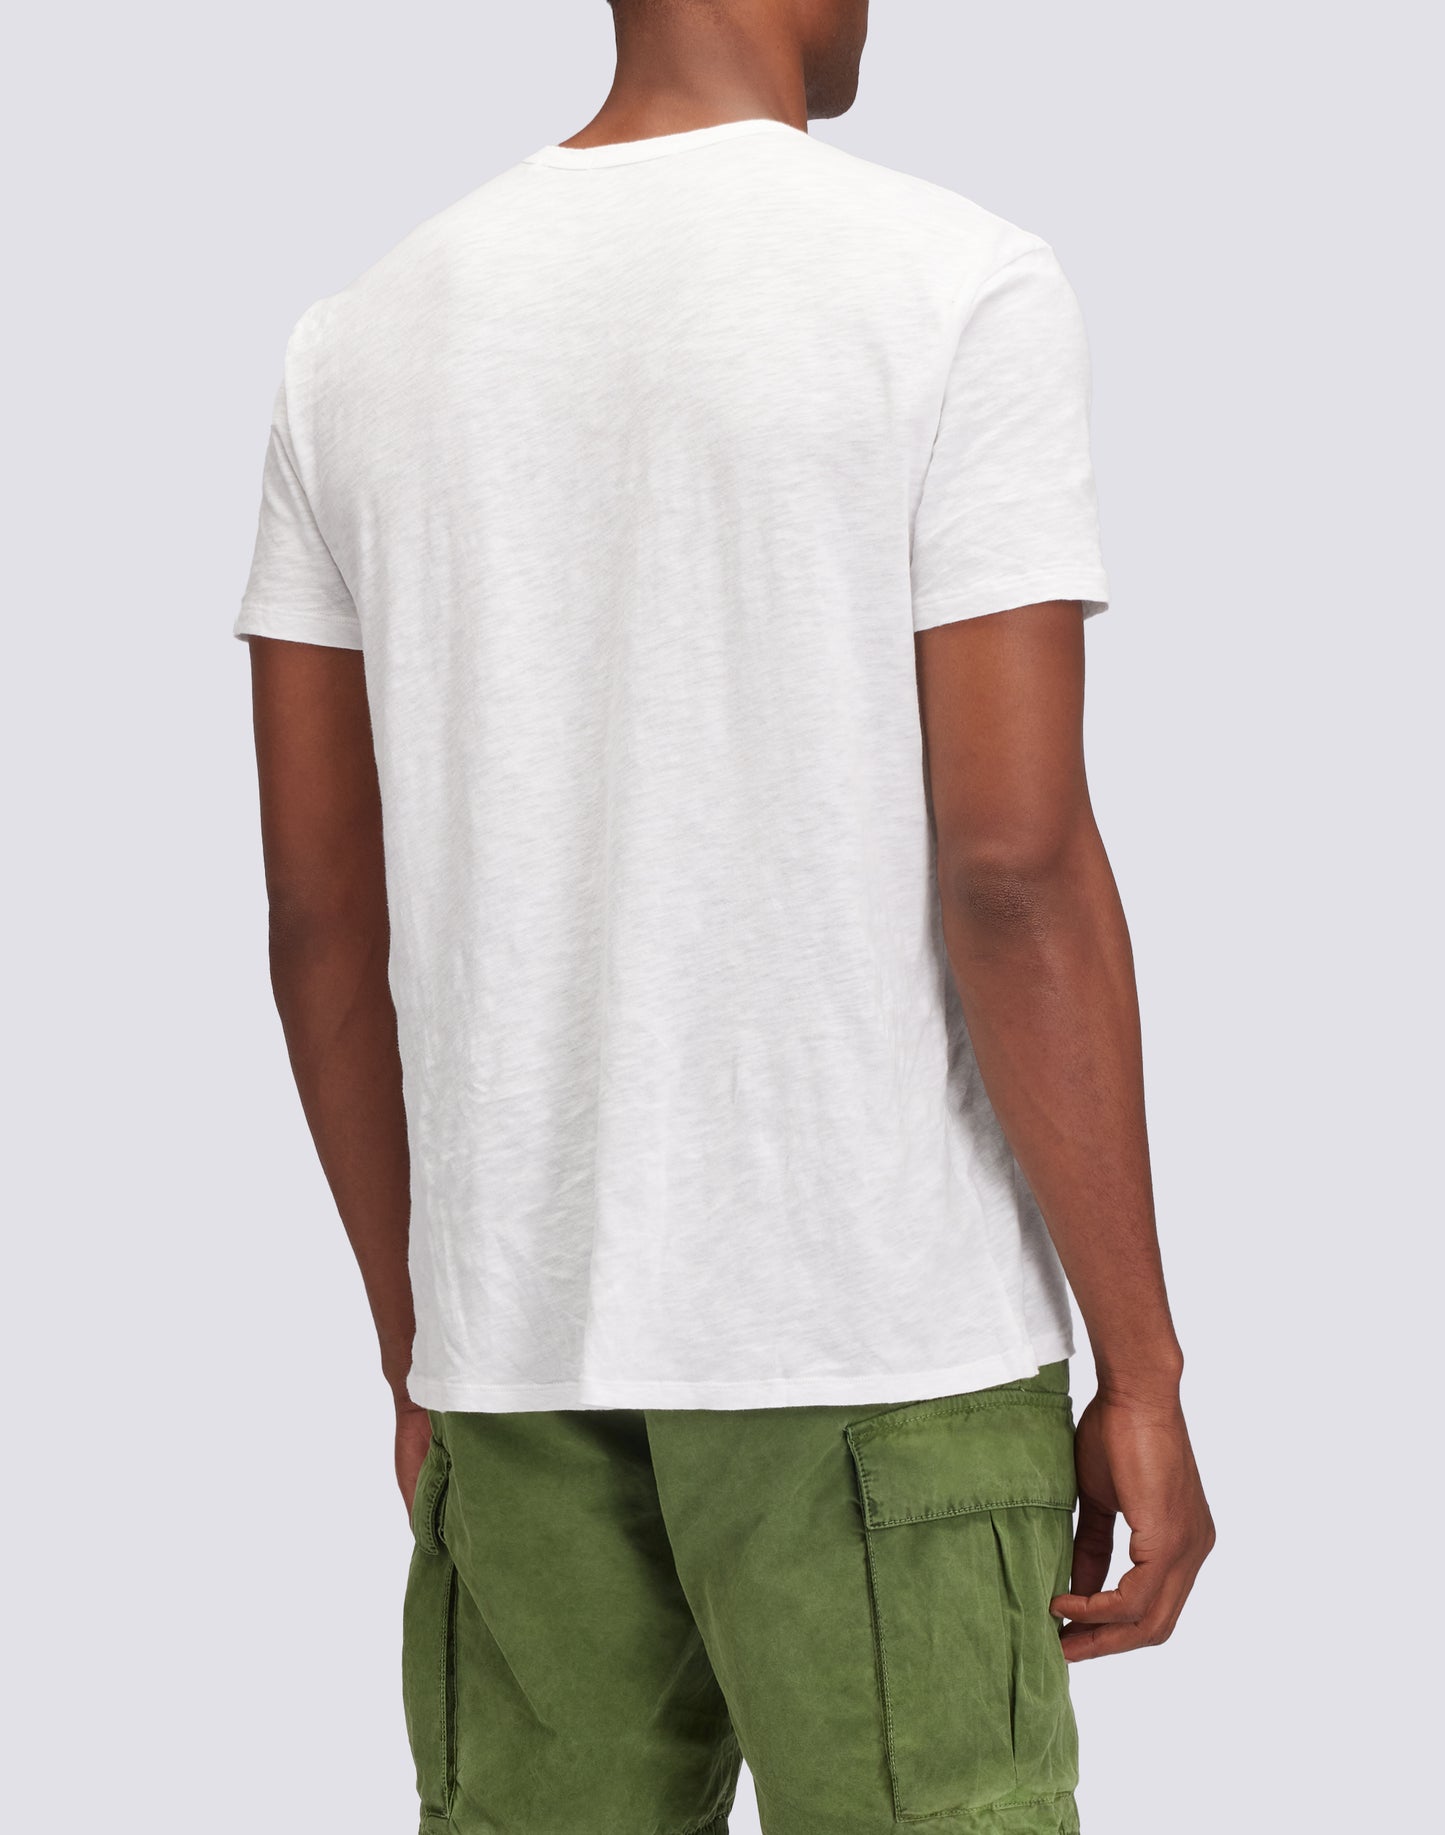 GARMENT DYED T-SHIRT WITH POCKET